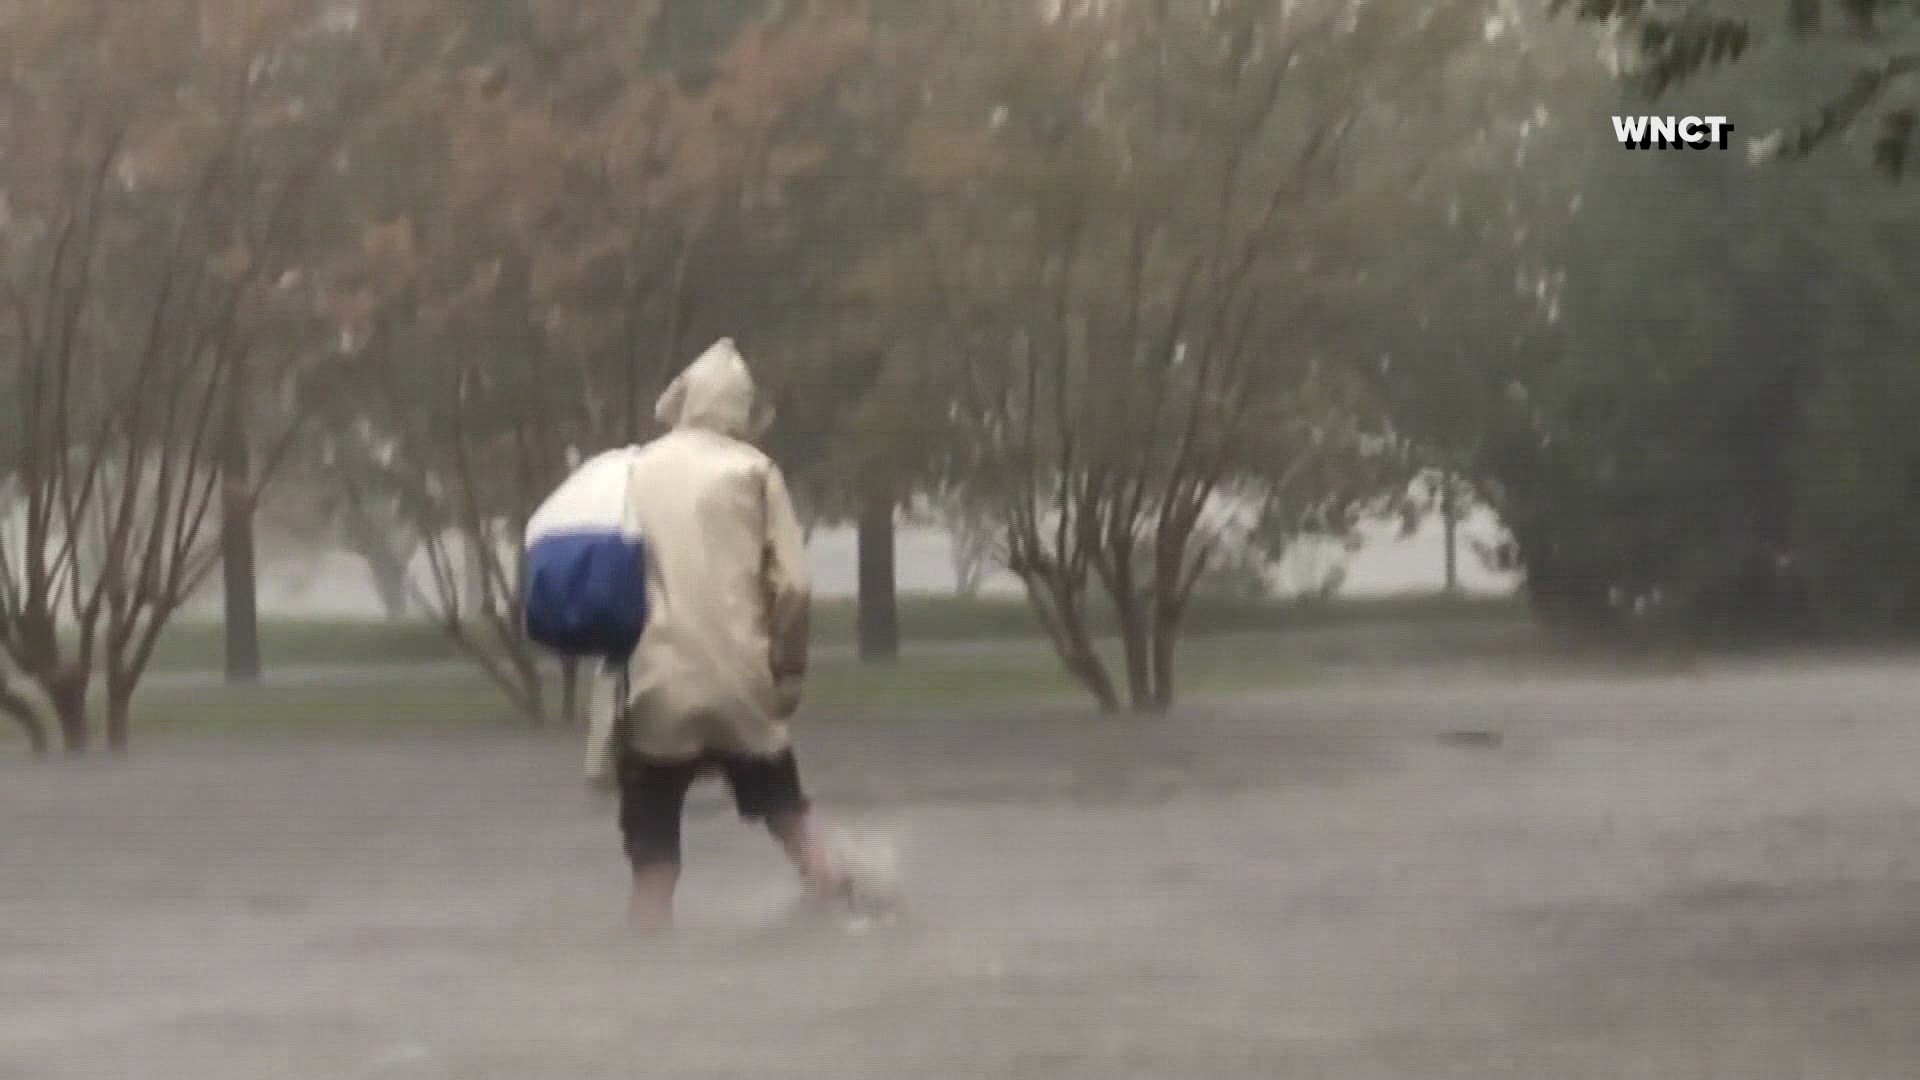 Flooding In New Bern From Hurricane Florence